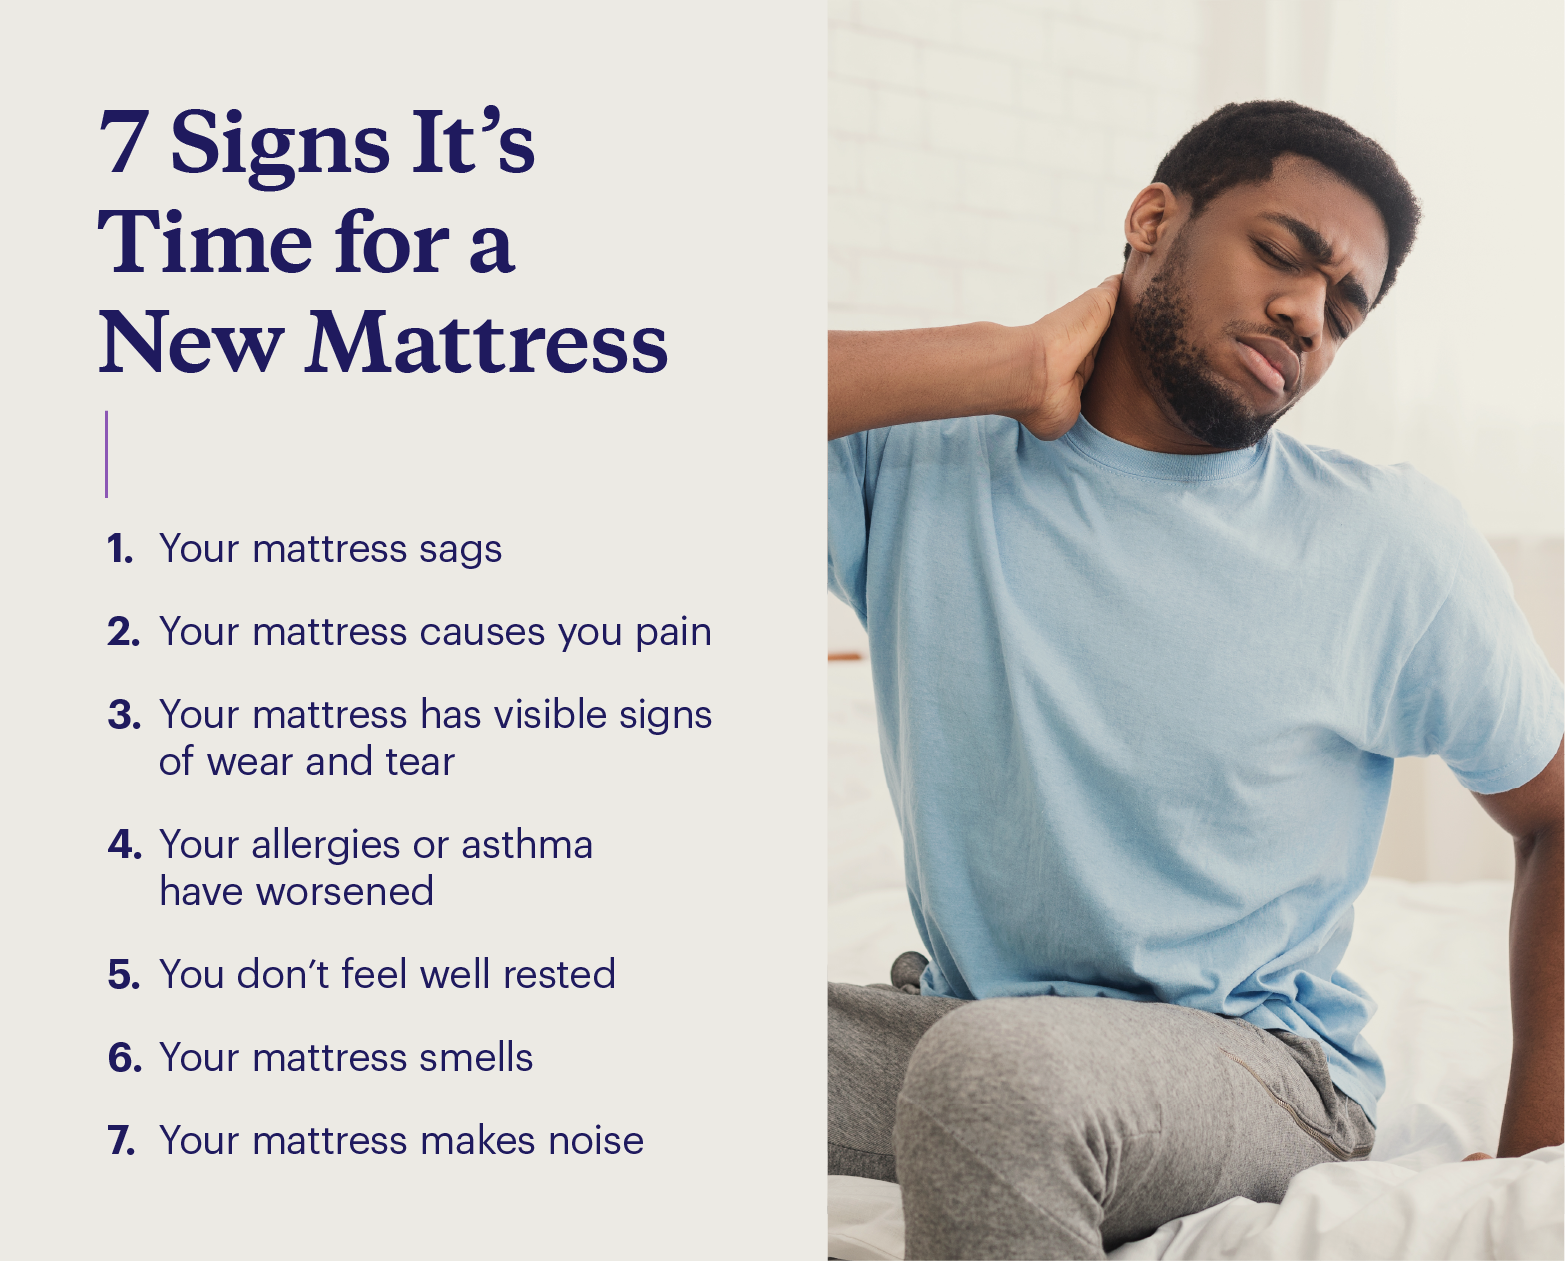 List of signs it’s time for a new mattress and man on bed with sore neck